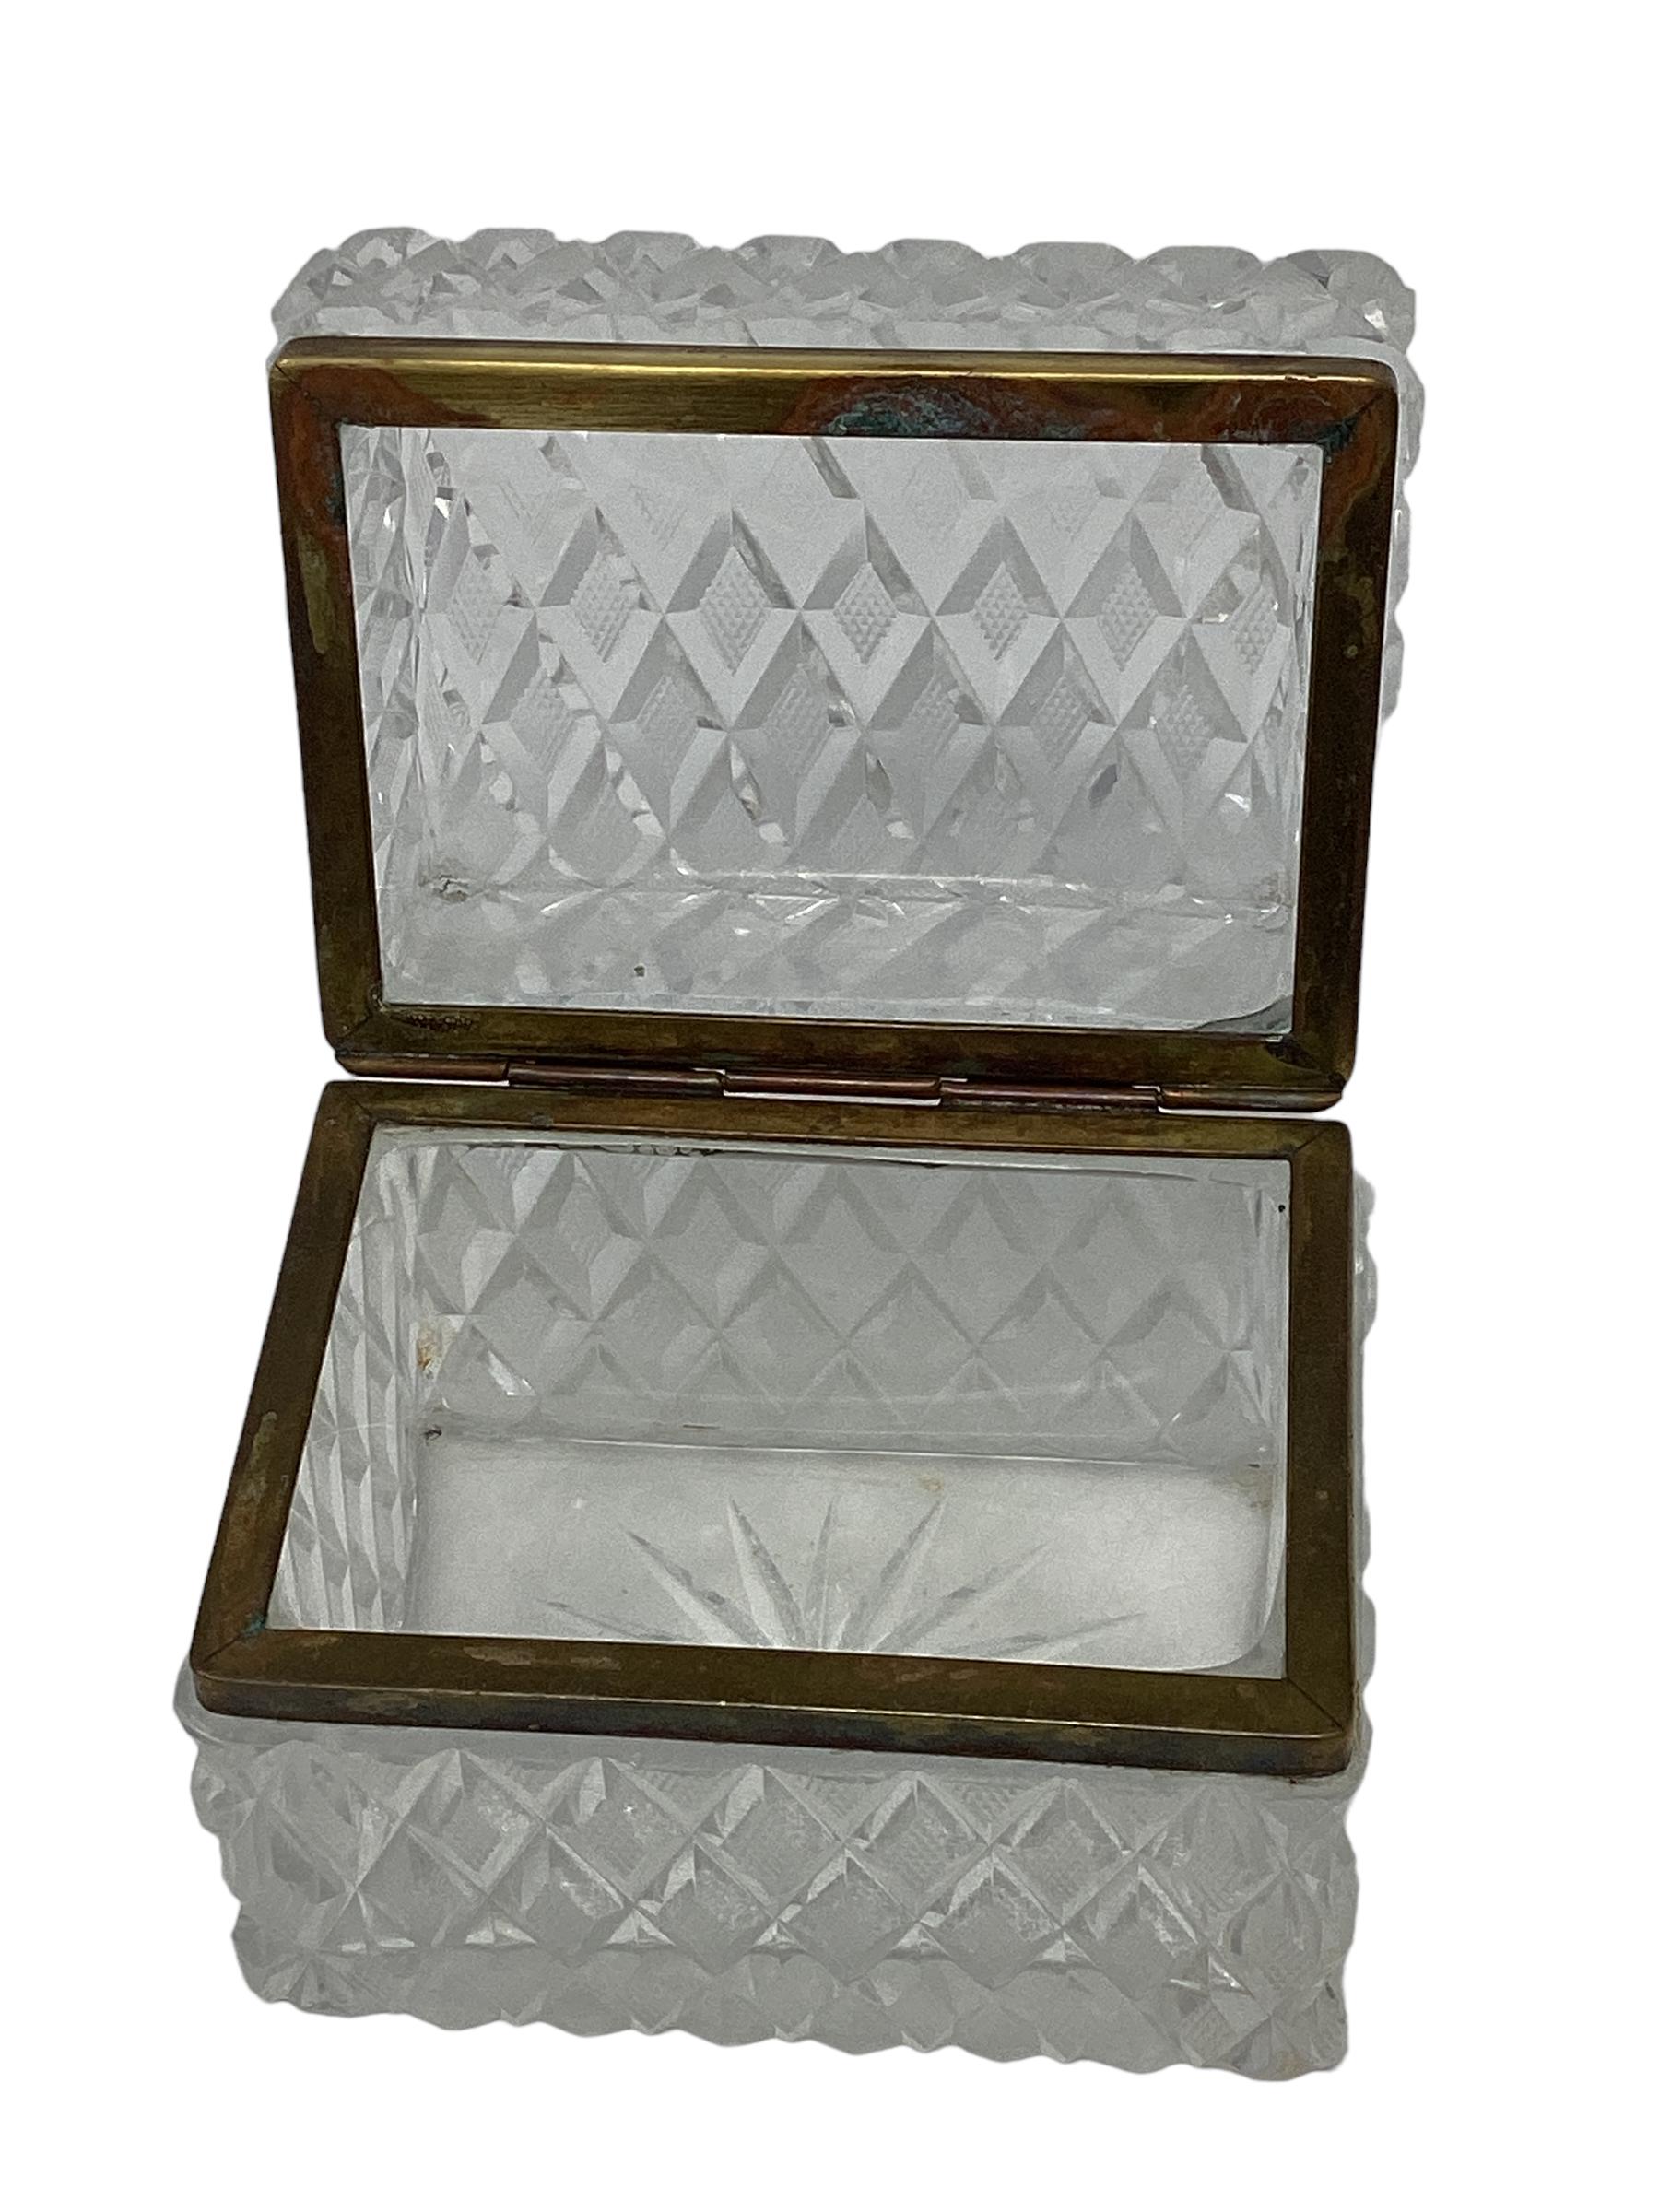 French Cut Crystal Box with Diamond Cut Pattern and brass mounts. Faceted etched design accentuates the beautiful design of this box. In very good vintage condition.